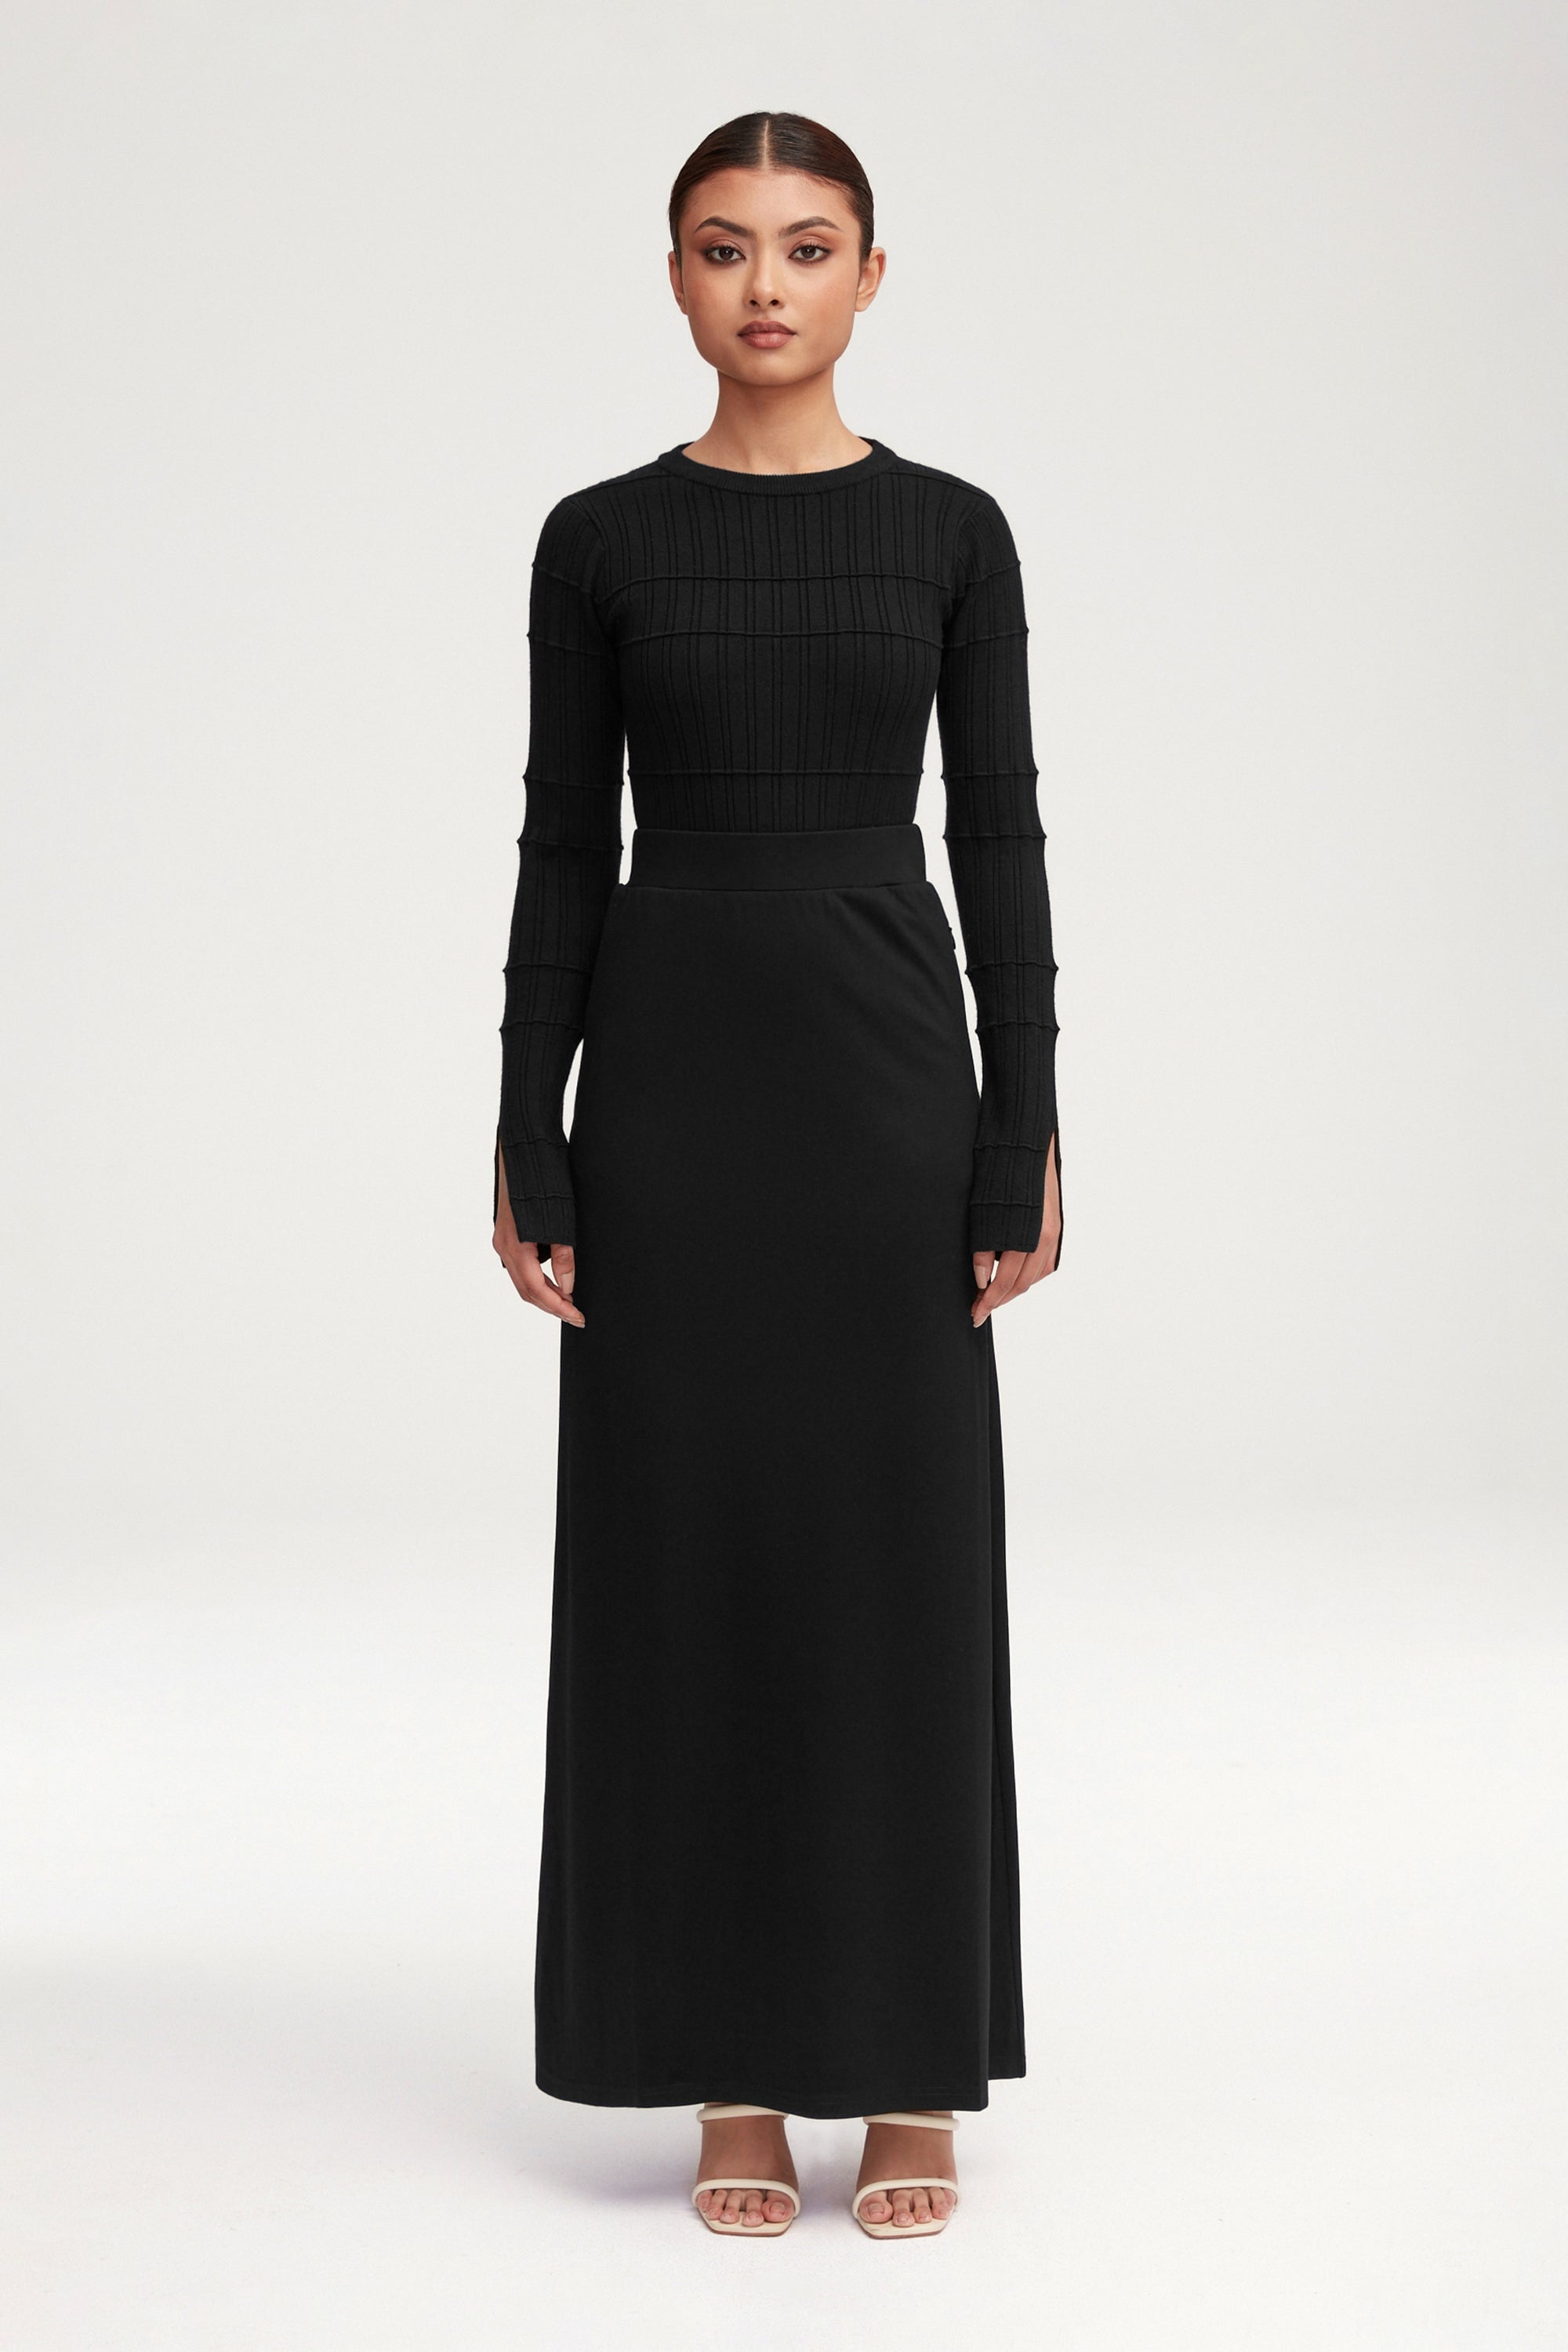 Essential Jersey Maxi Skirt - Black Clothing Veiled 